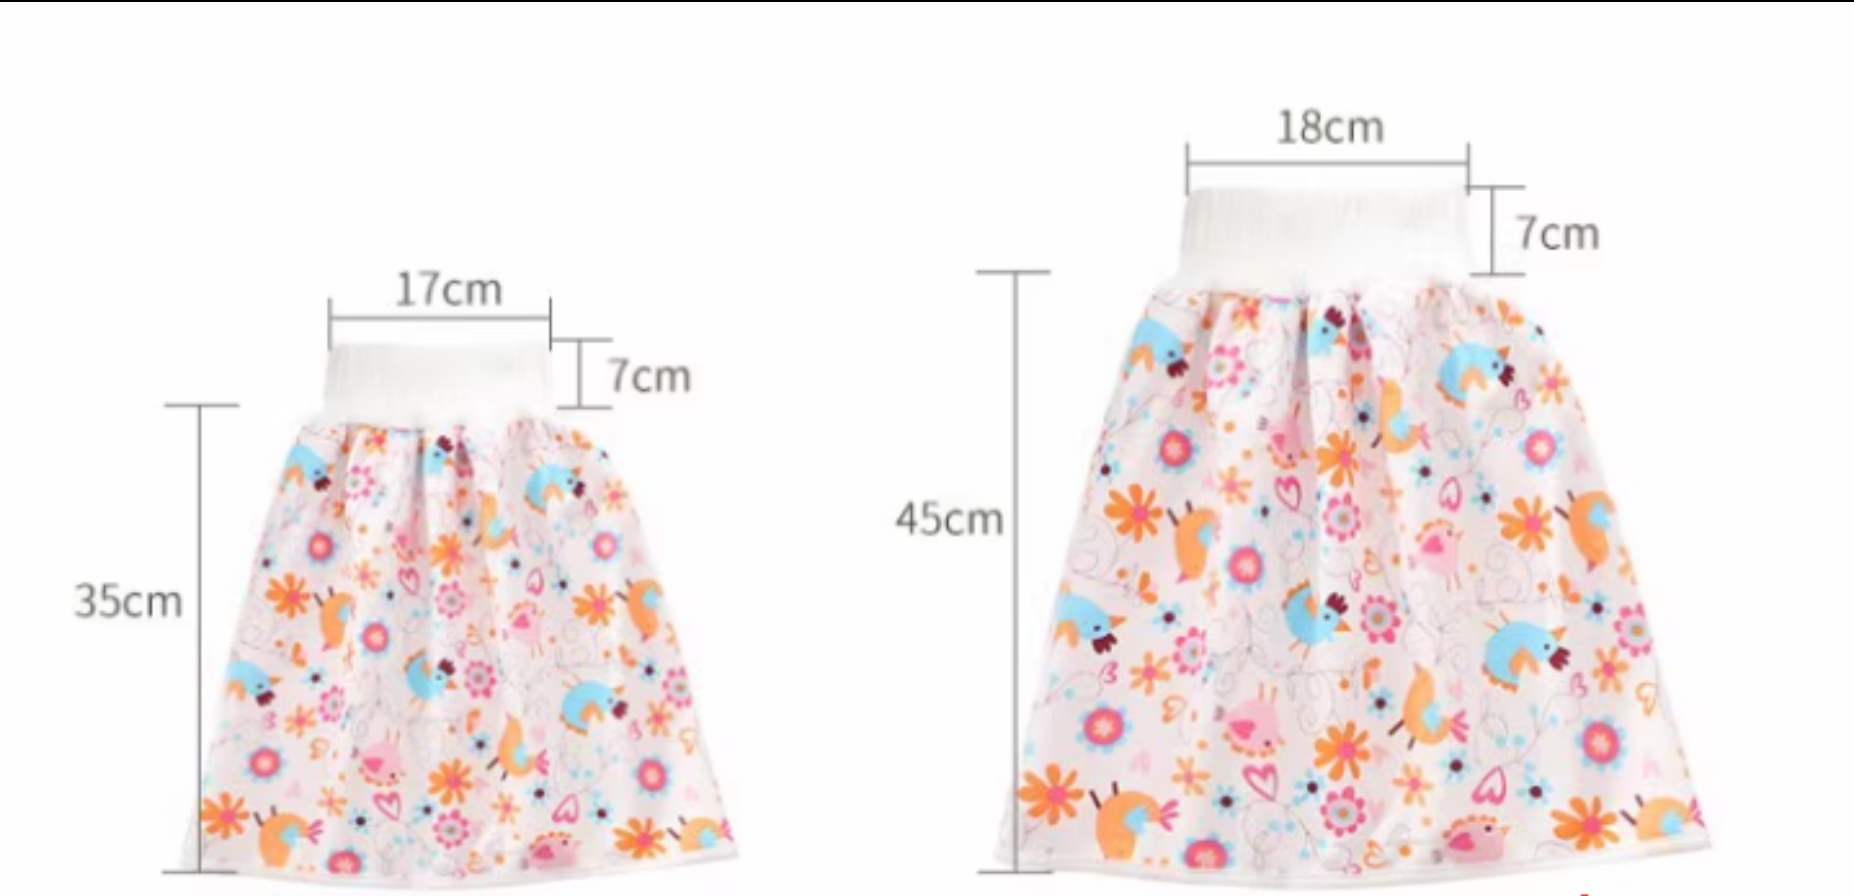 NoLeaky - Soft Children's Recyclable Diaper 2 in 1 Anti Bed-wetting Training Skirt Shorts